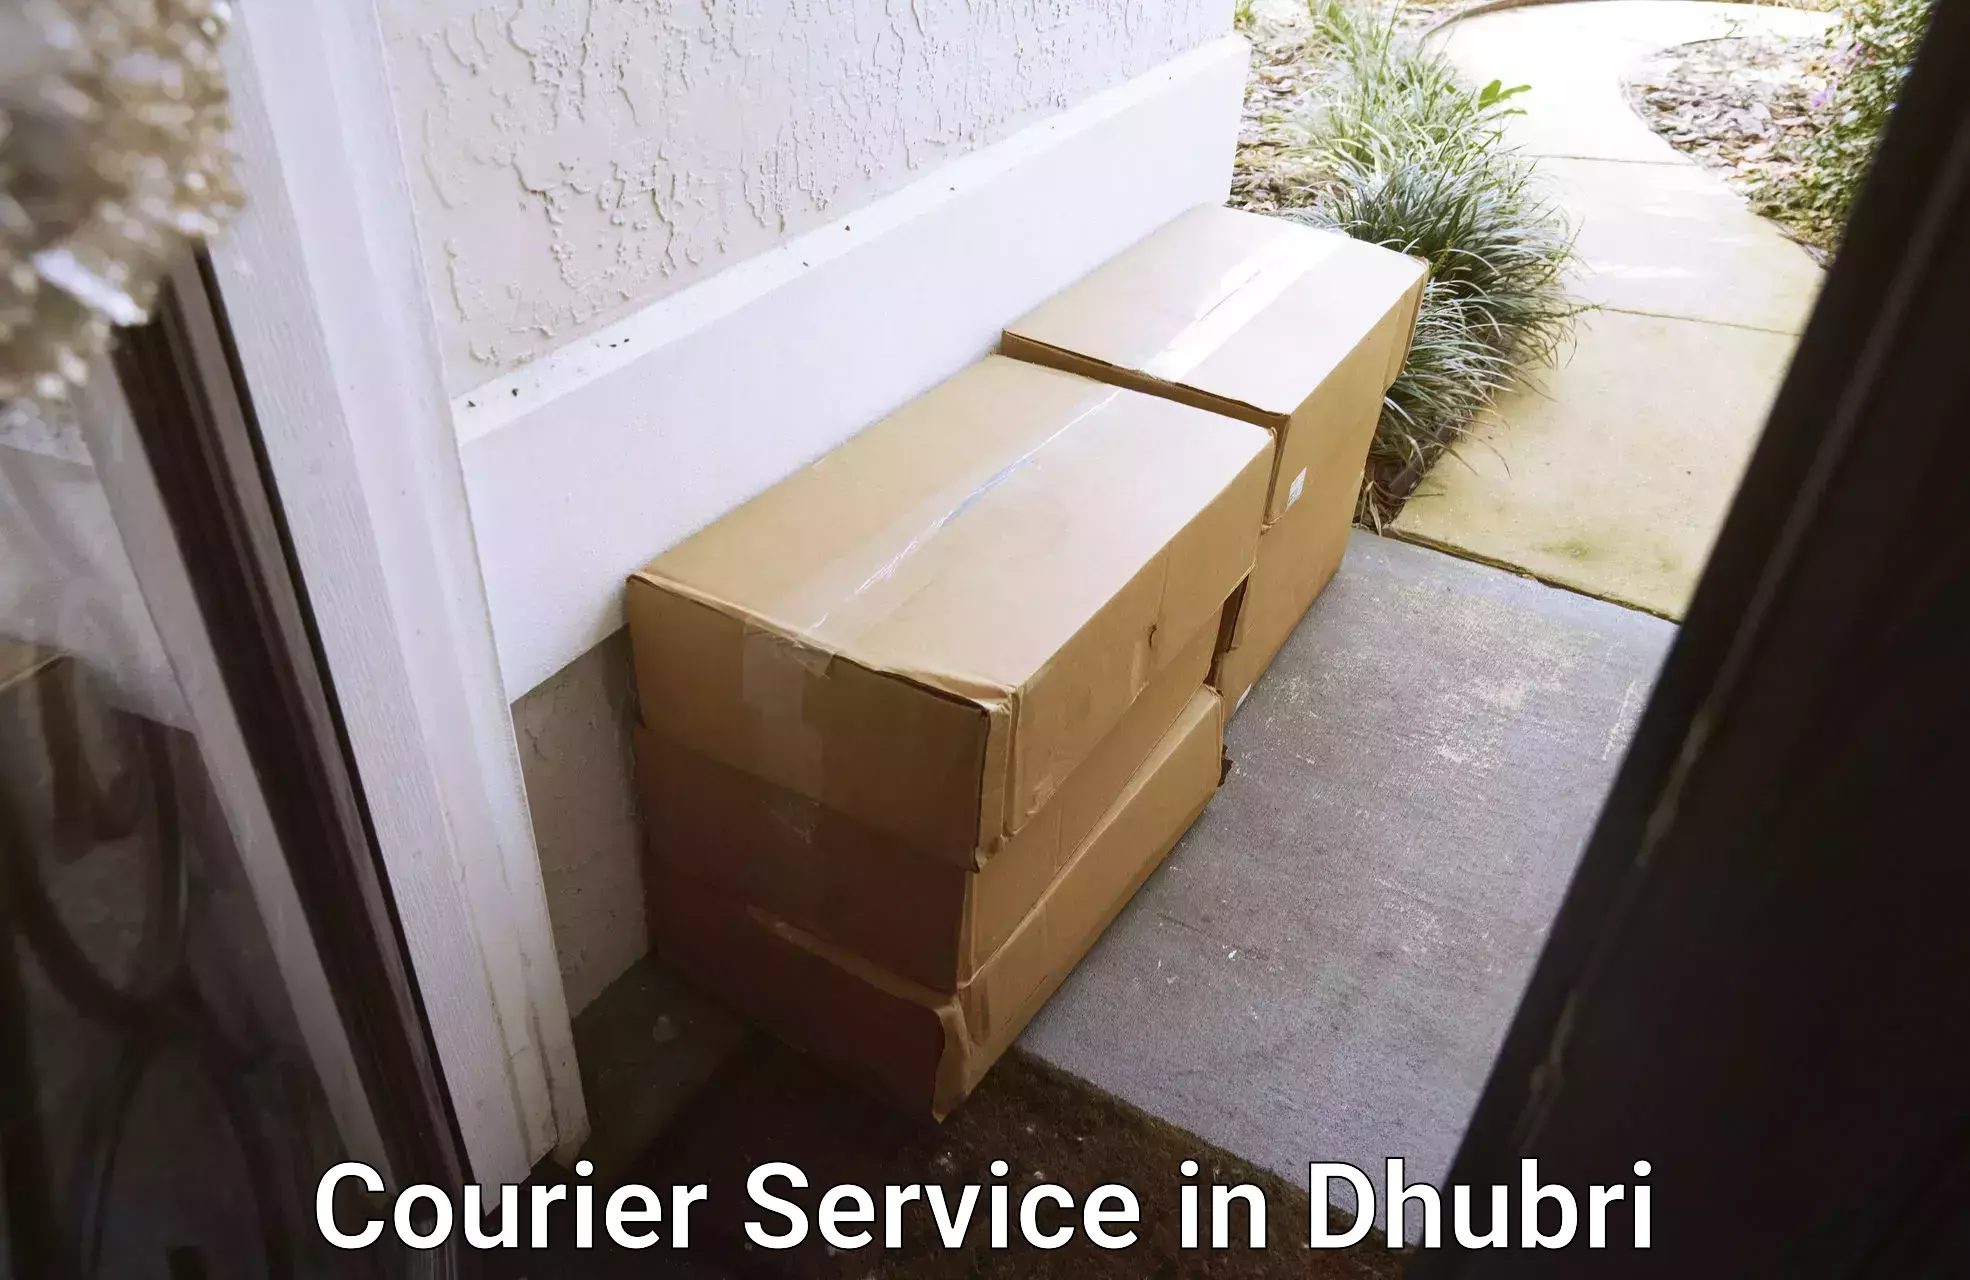 Same-day delivery solutions in Dhubri